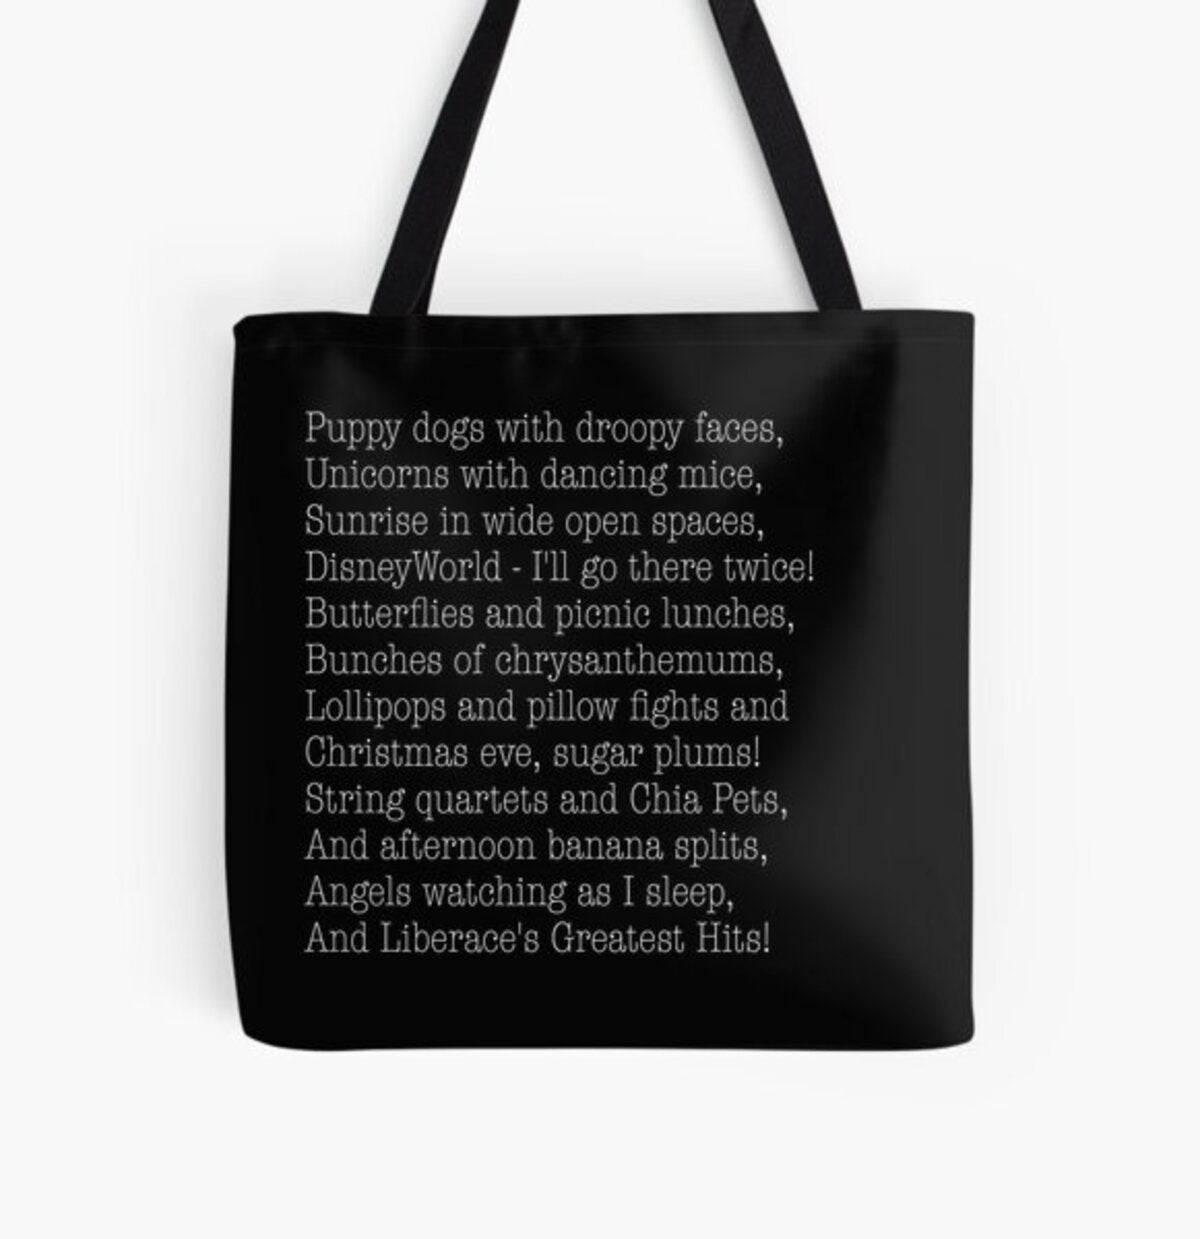 10 Creative Ways to Use Edge to Edge Printing Tote Bags at Your Next Event